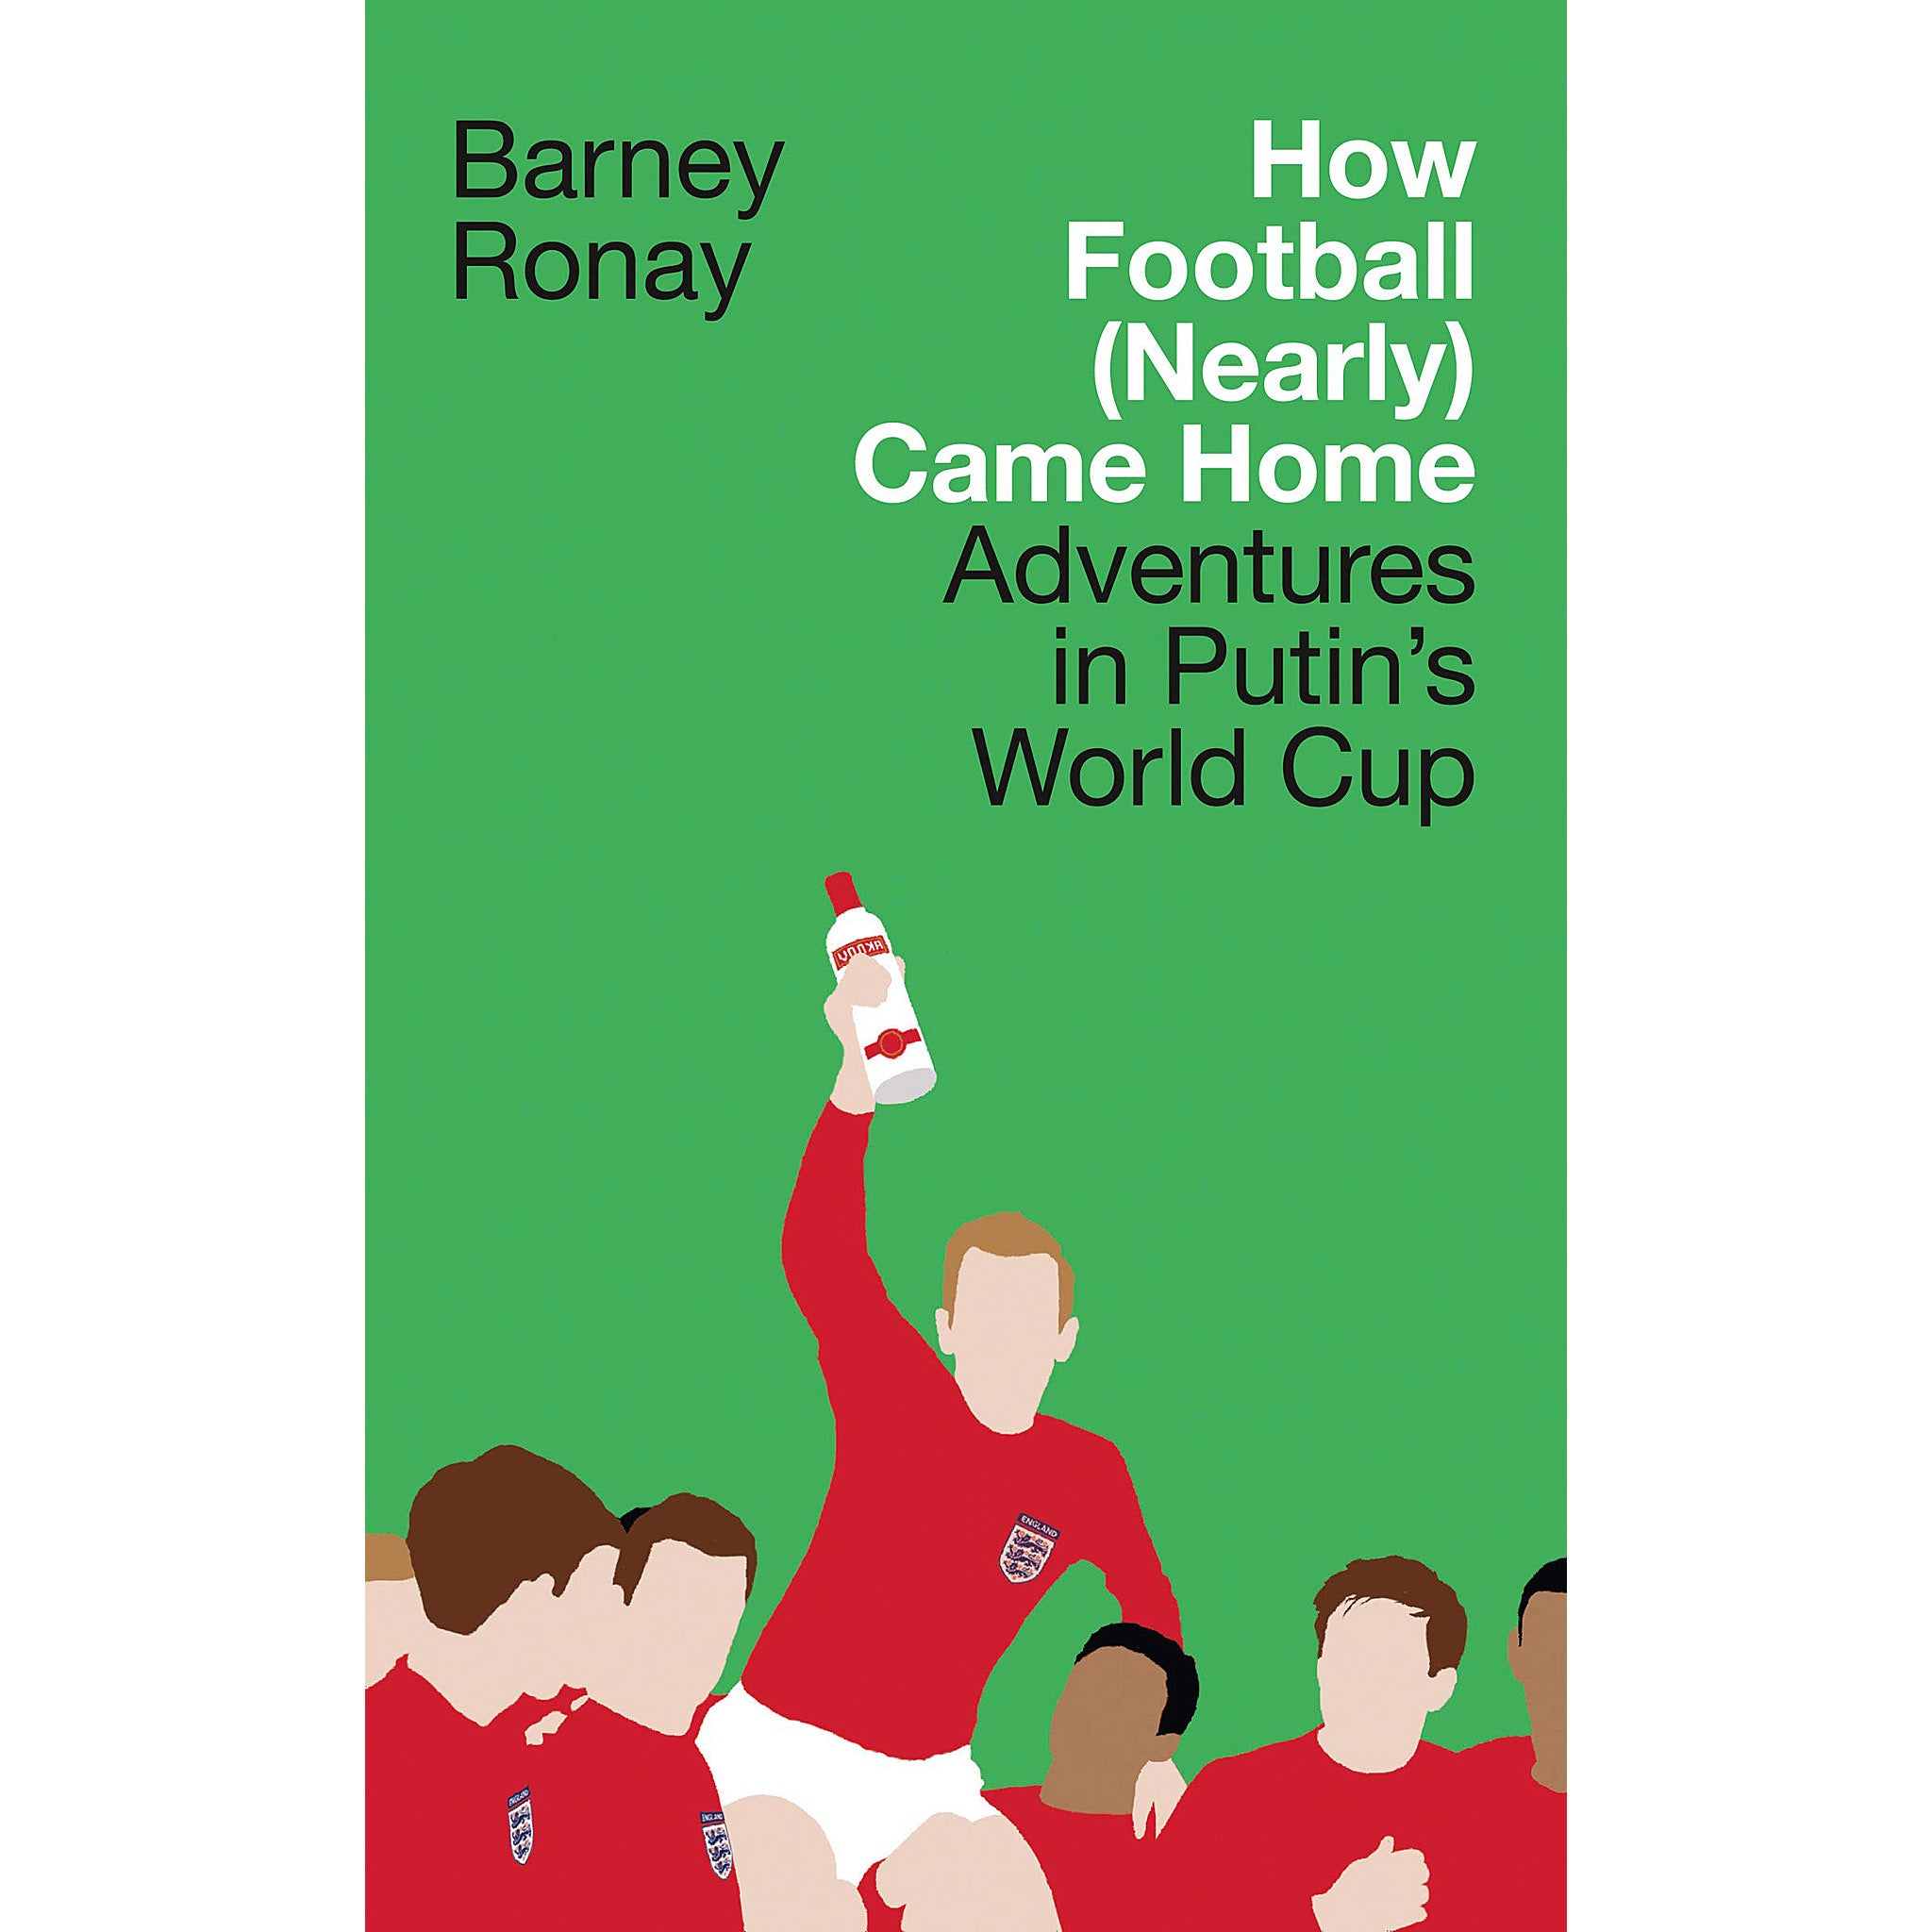 How Football (Nearly) Came Home – Adventures in Putin's World Cup